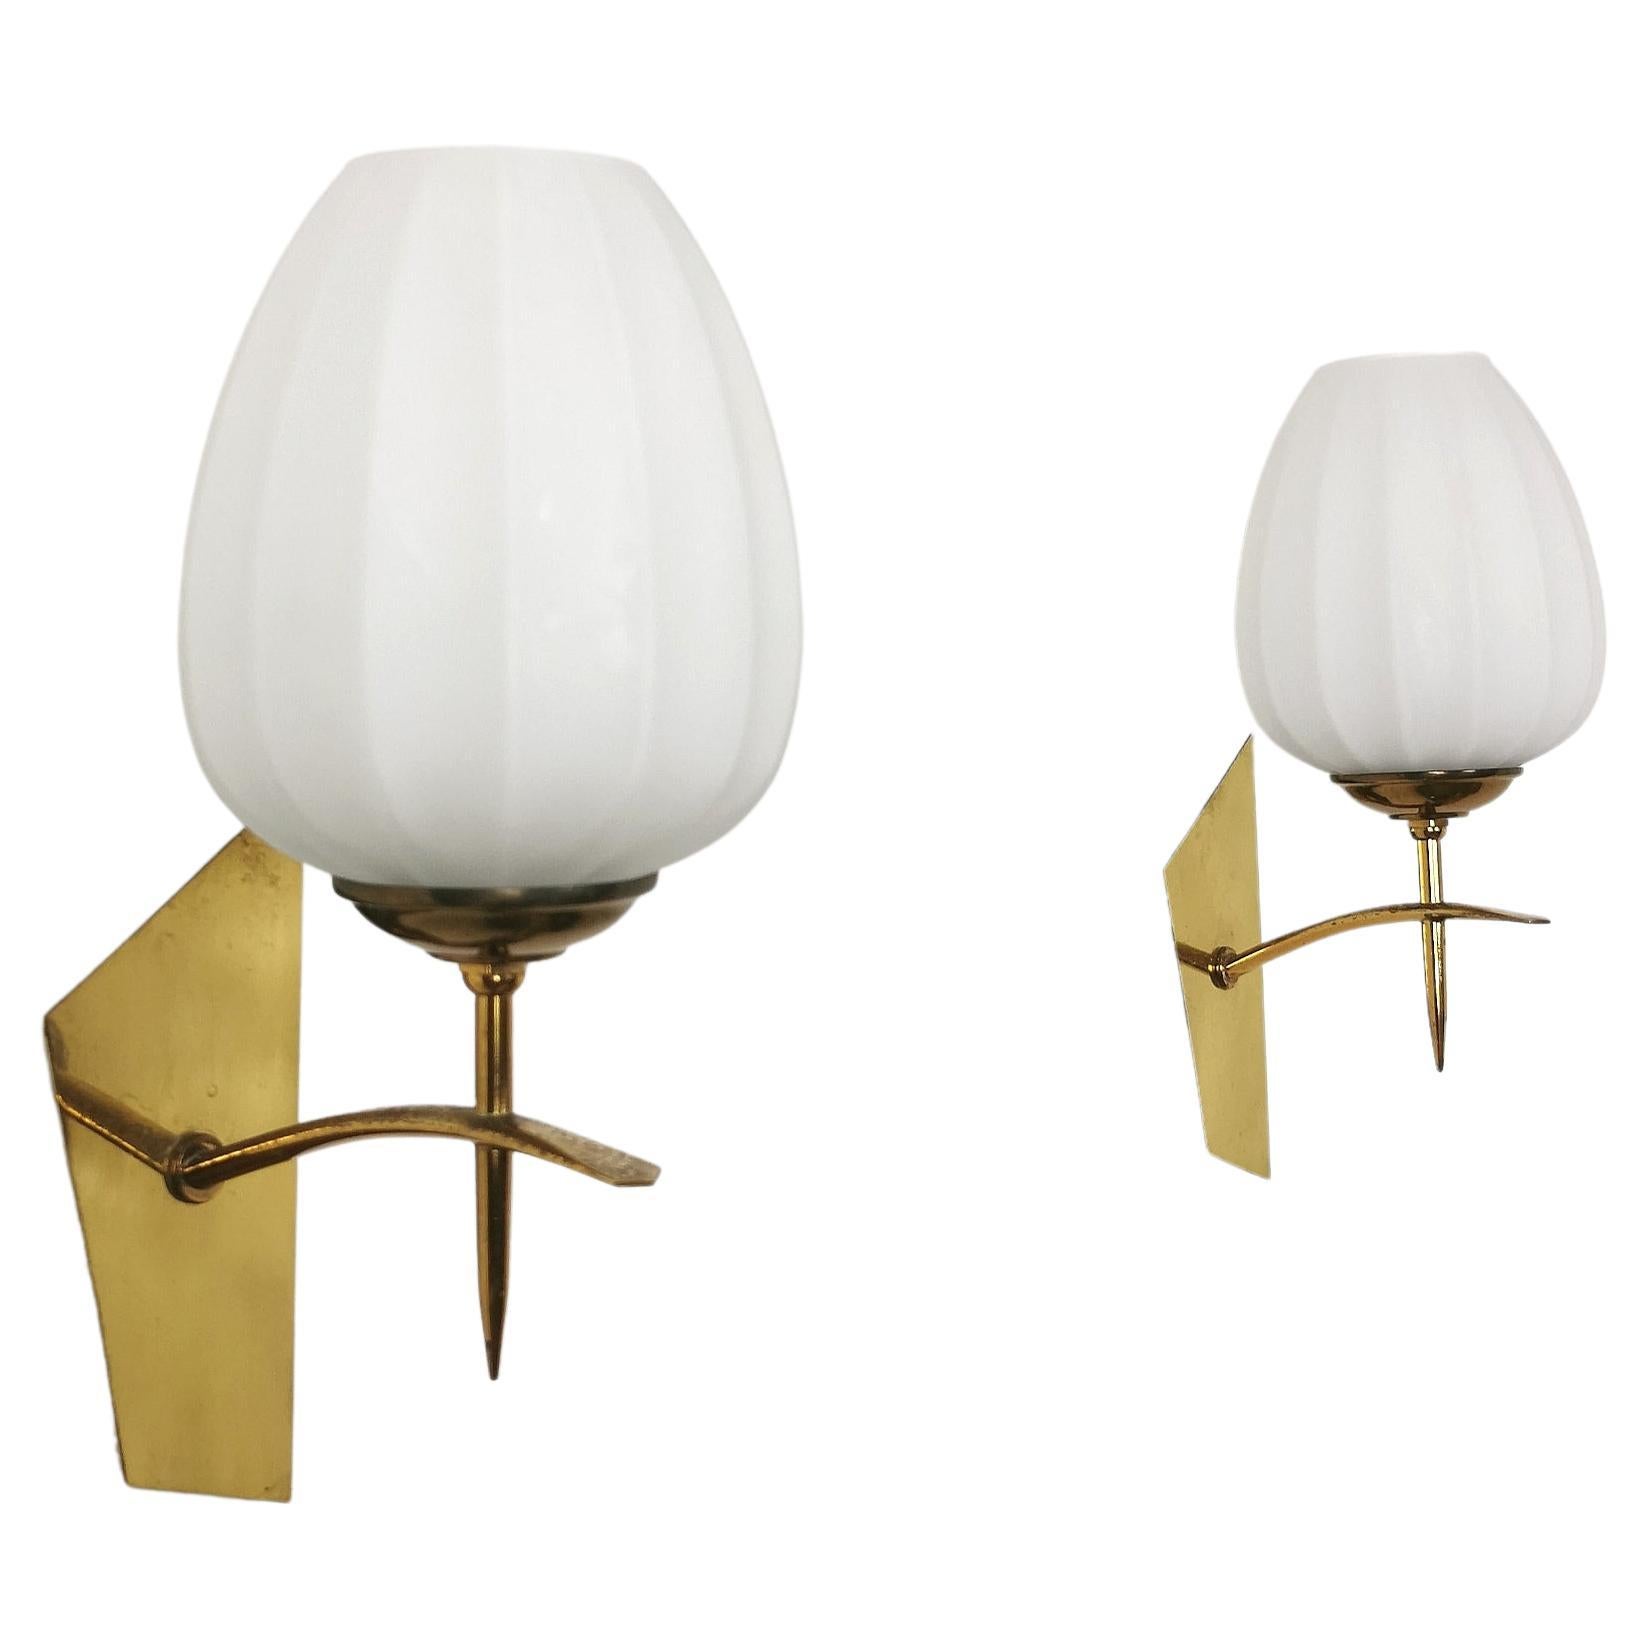 Pair of Wall lights Sconces Brass Opaline Glass Midcentury Modern Italy 1960s 